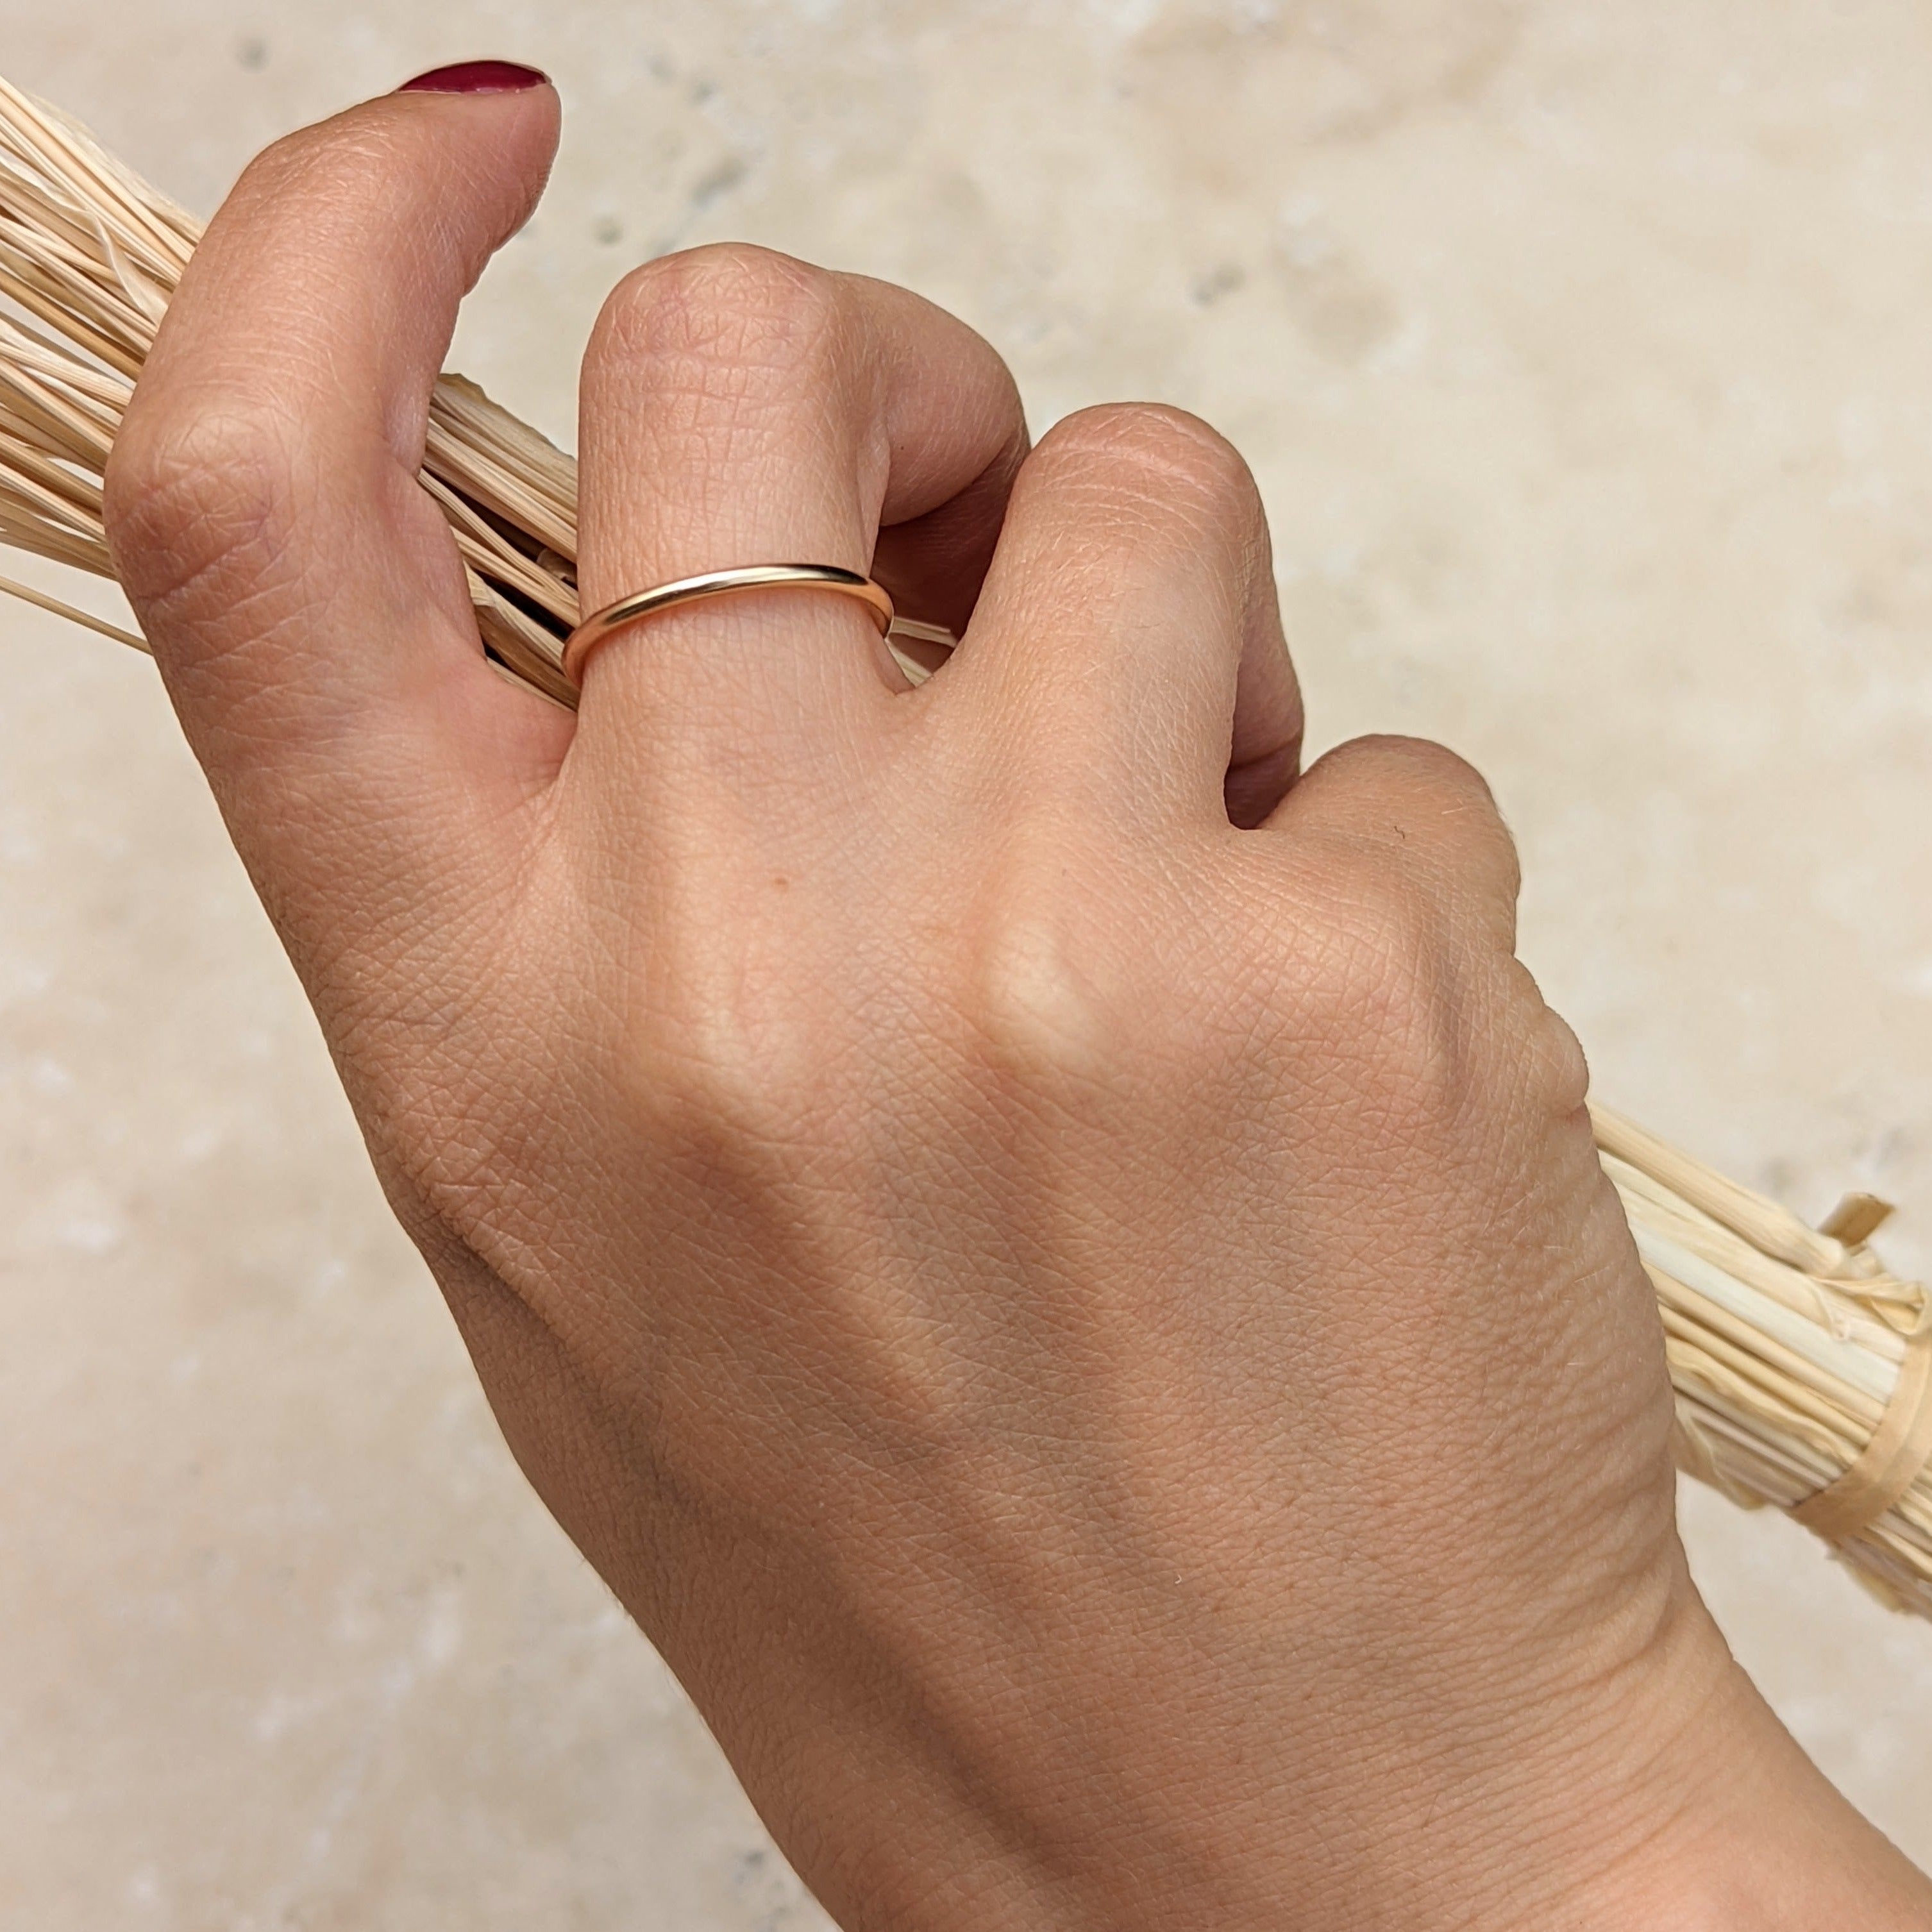 Hand holding dried grass and wearing a plain smooth slim gold filled ring